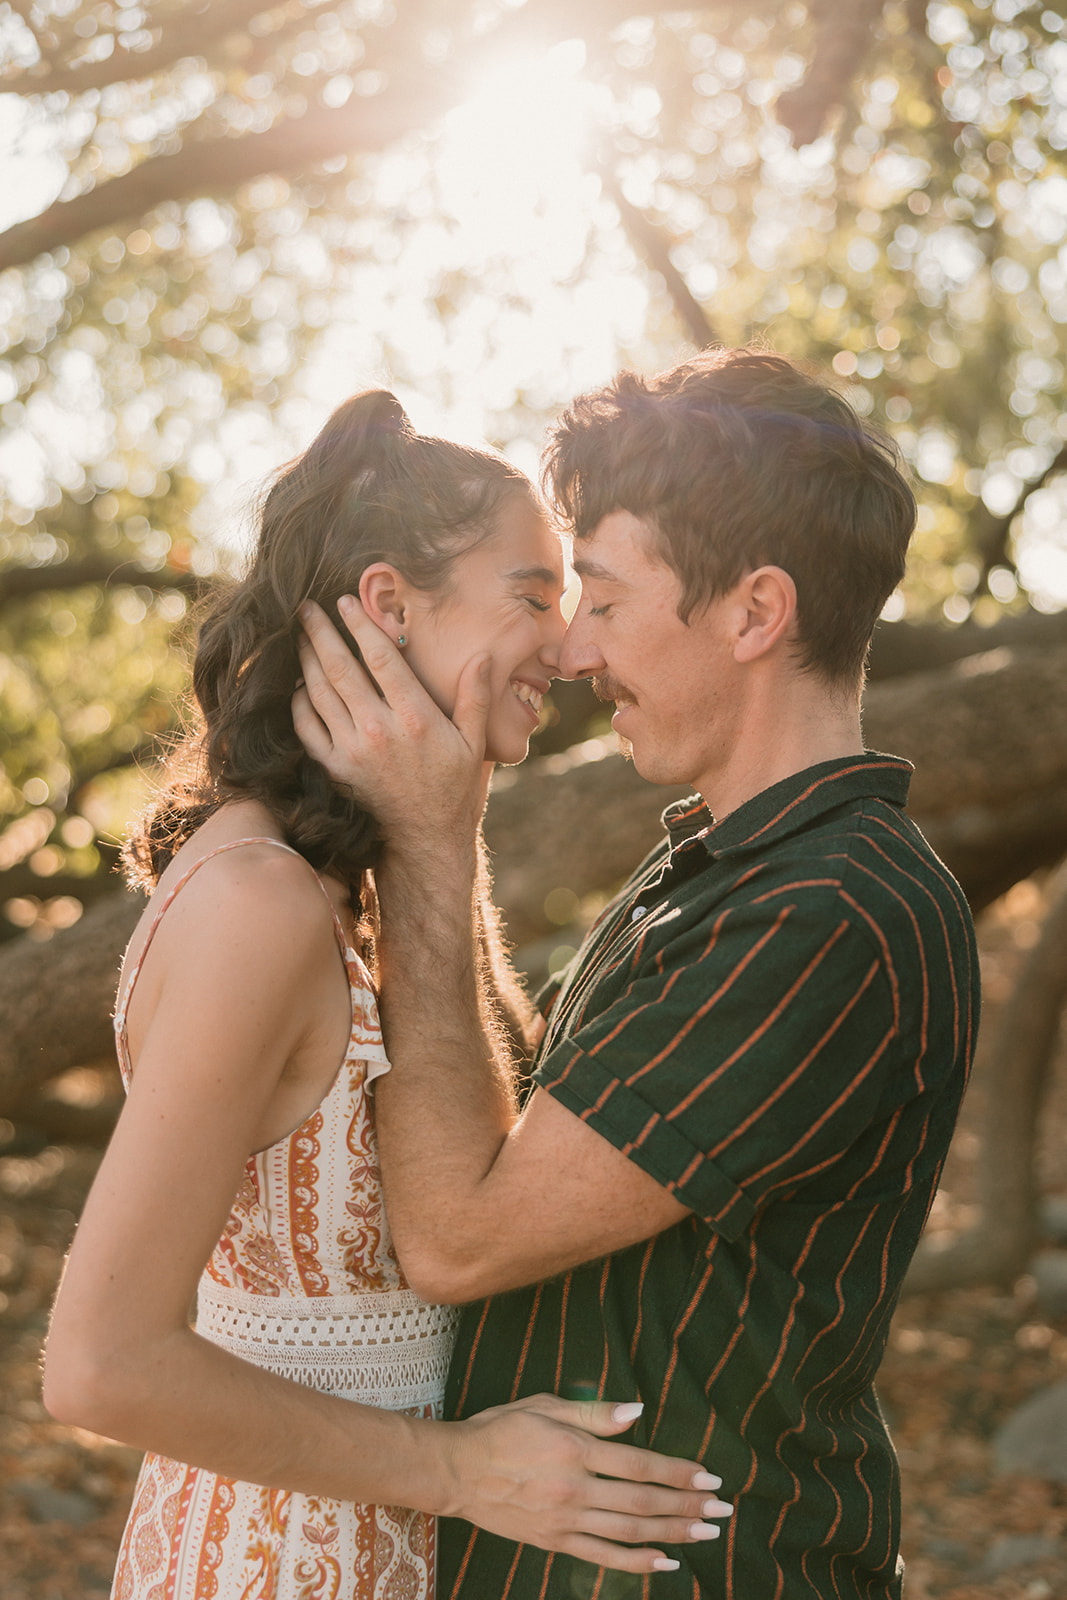 A couple embracing under a tree, exchanging a loving gaze, dressed in casual summer attire for their park engagement photos